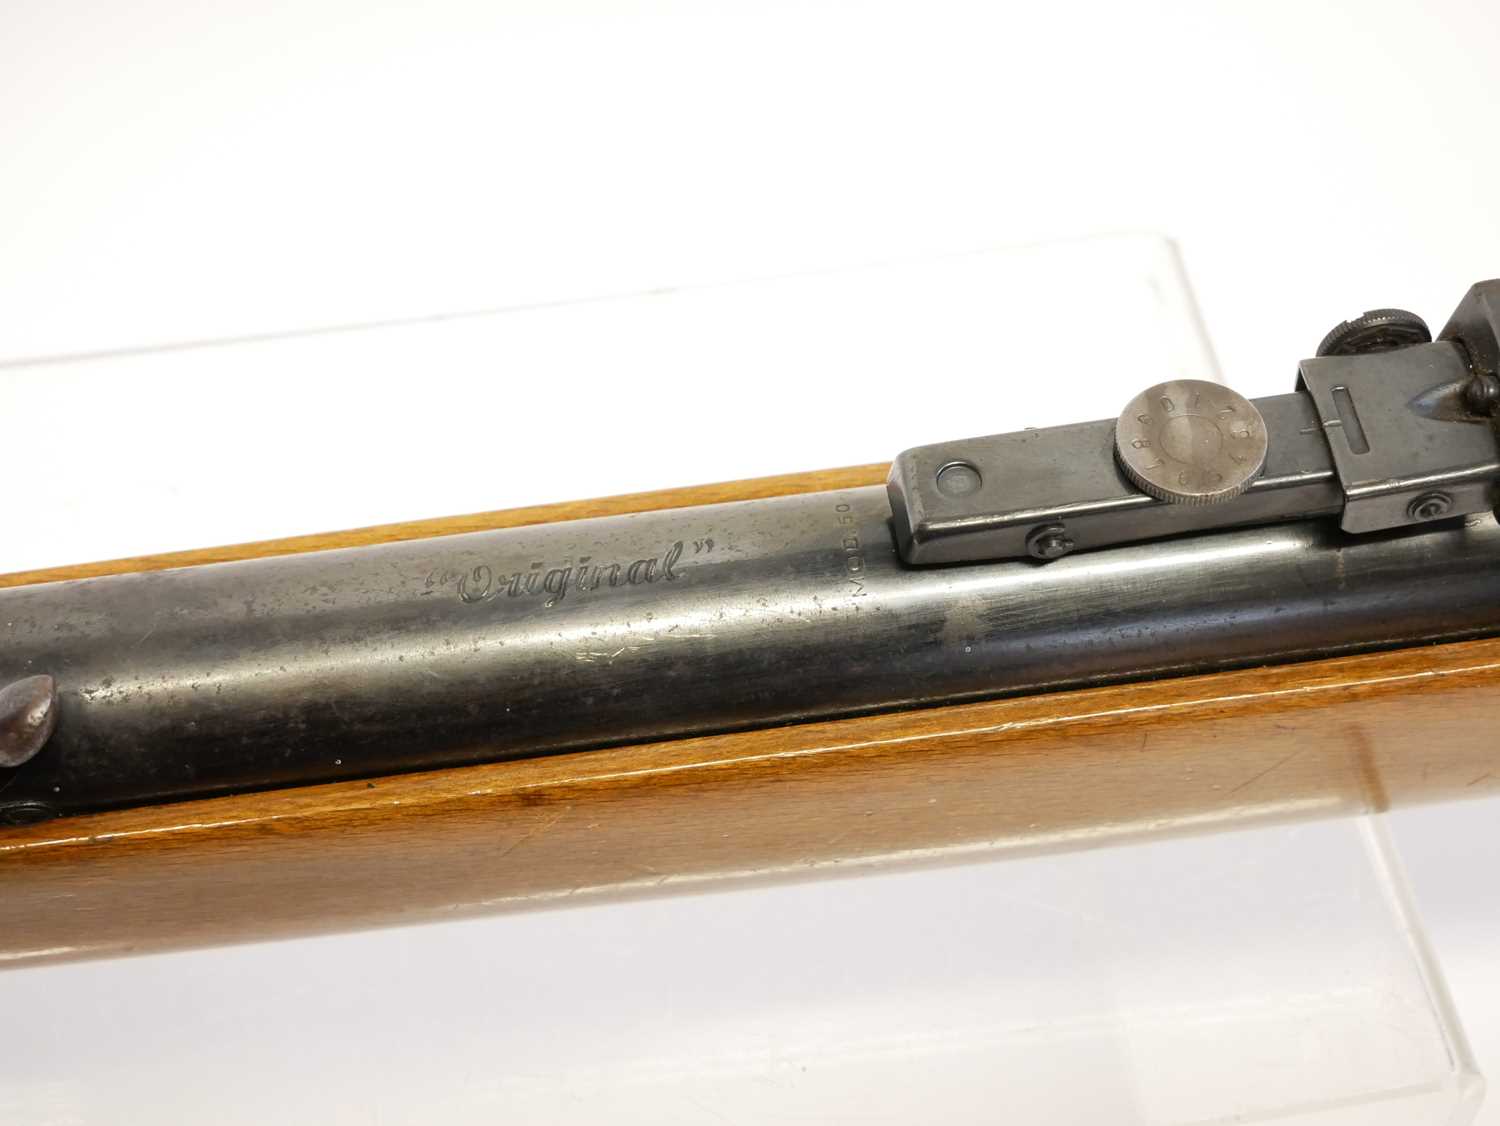 Original model 50 .22 air rifle, serial number 71371623, 18.5 inch barrel with tunnel front sight - Image 10 of 13